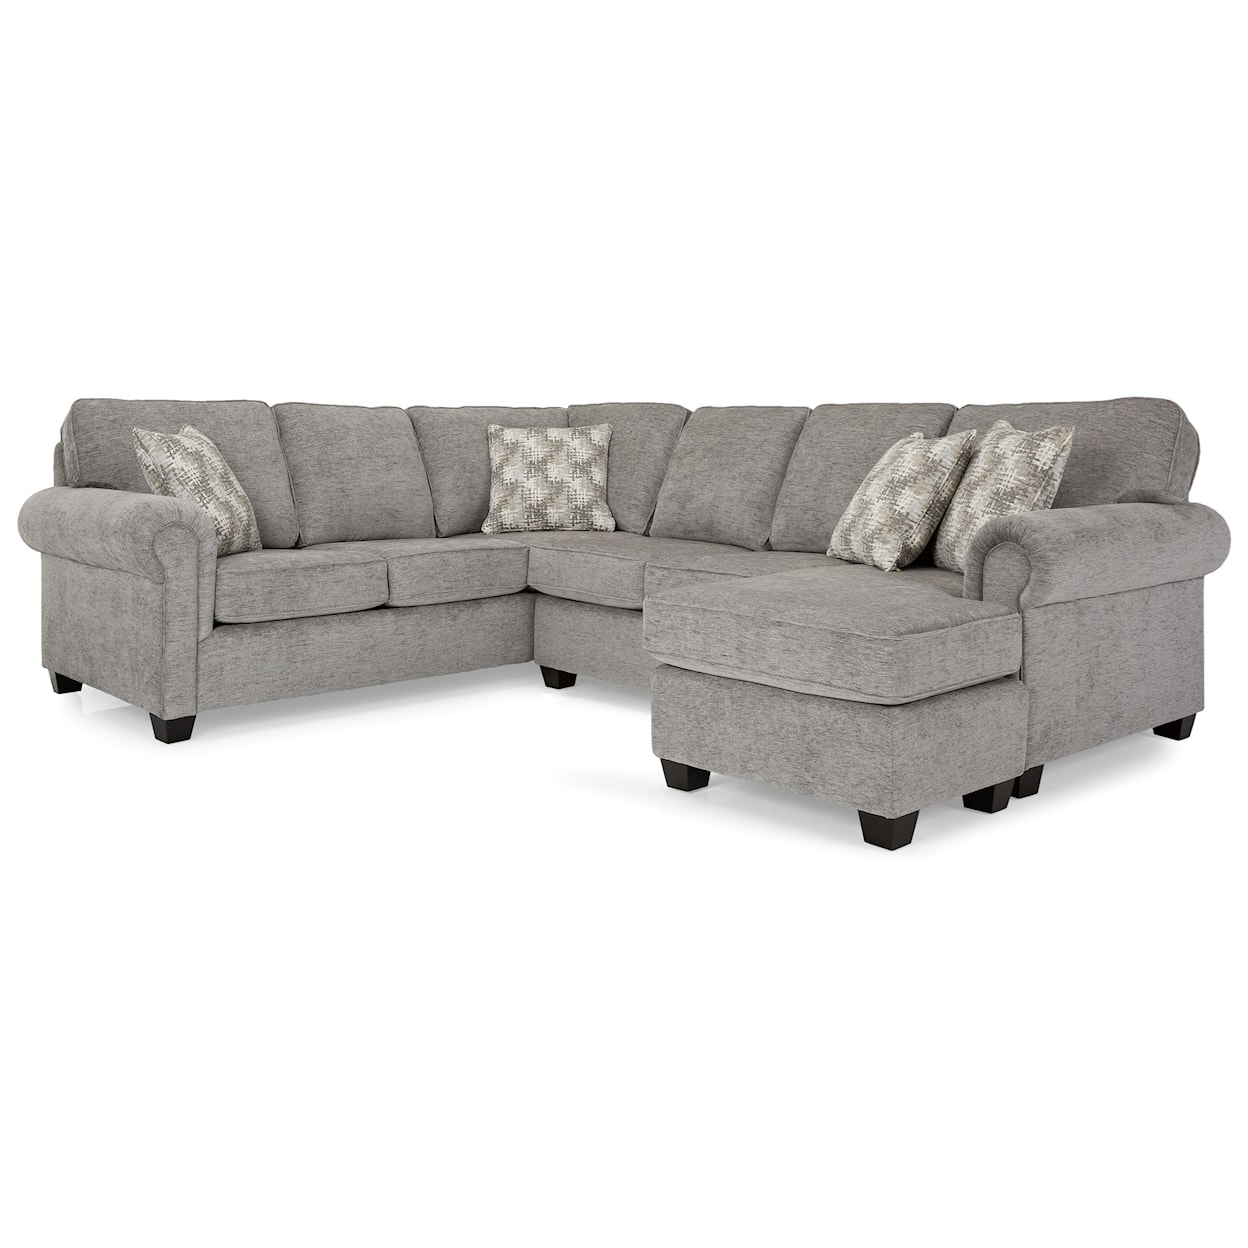 Decor-Rest 2006 Sectional Series Sectional with Chaise